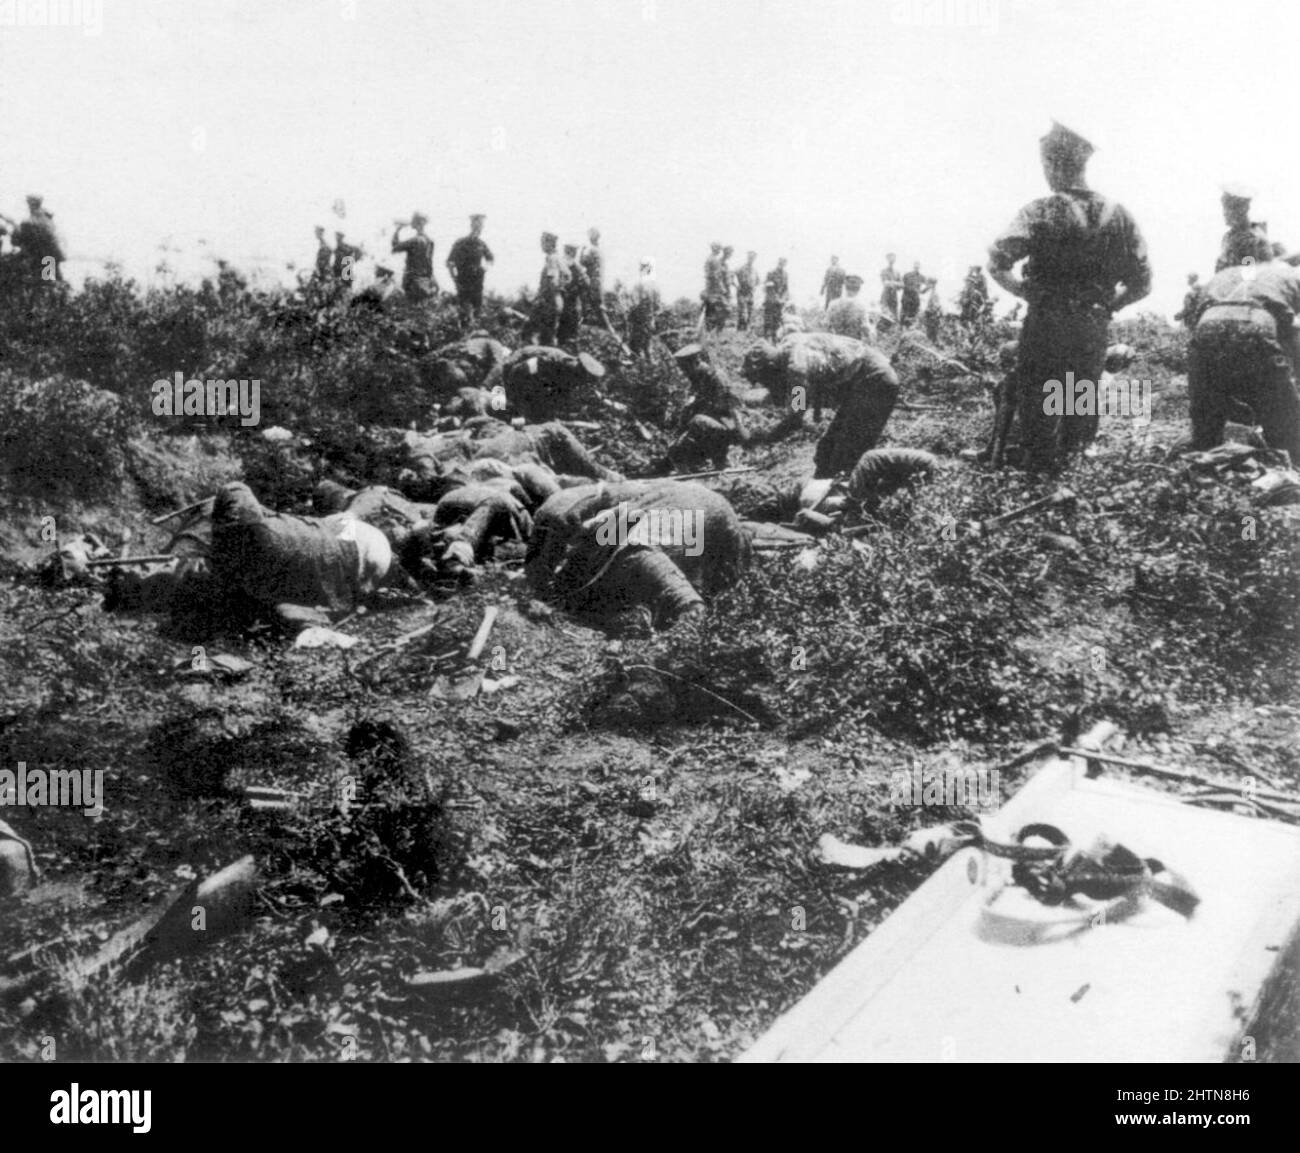 Ottoman and Allied soldiers collect the dead from betweenthe lines. An estimated 3000 Turks died in an assault on the 19th May. By the 24th May the smell of 3000 rotting bodies was too much and both sides agreed to a 24hr truce to bury the dead. Stock Photo